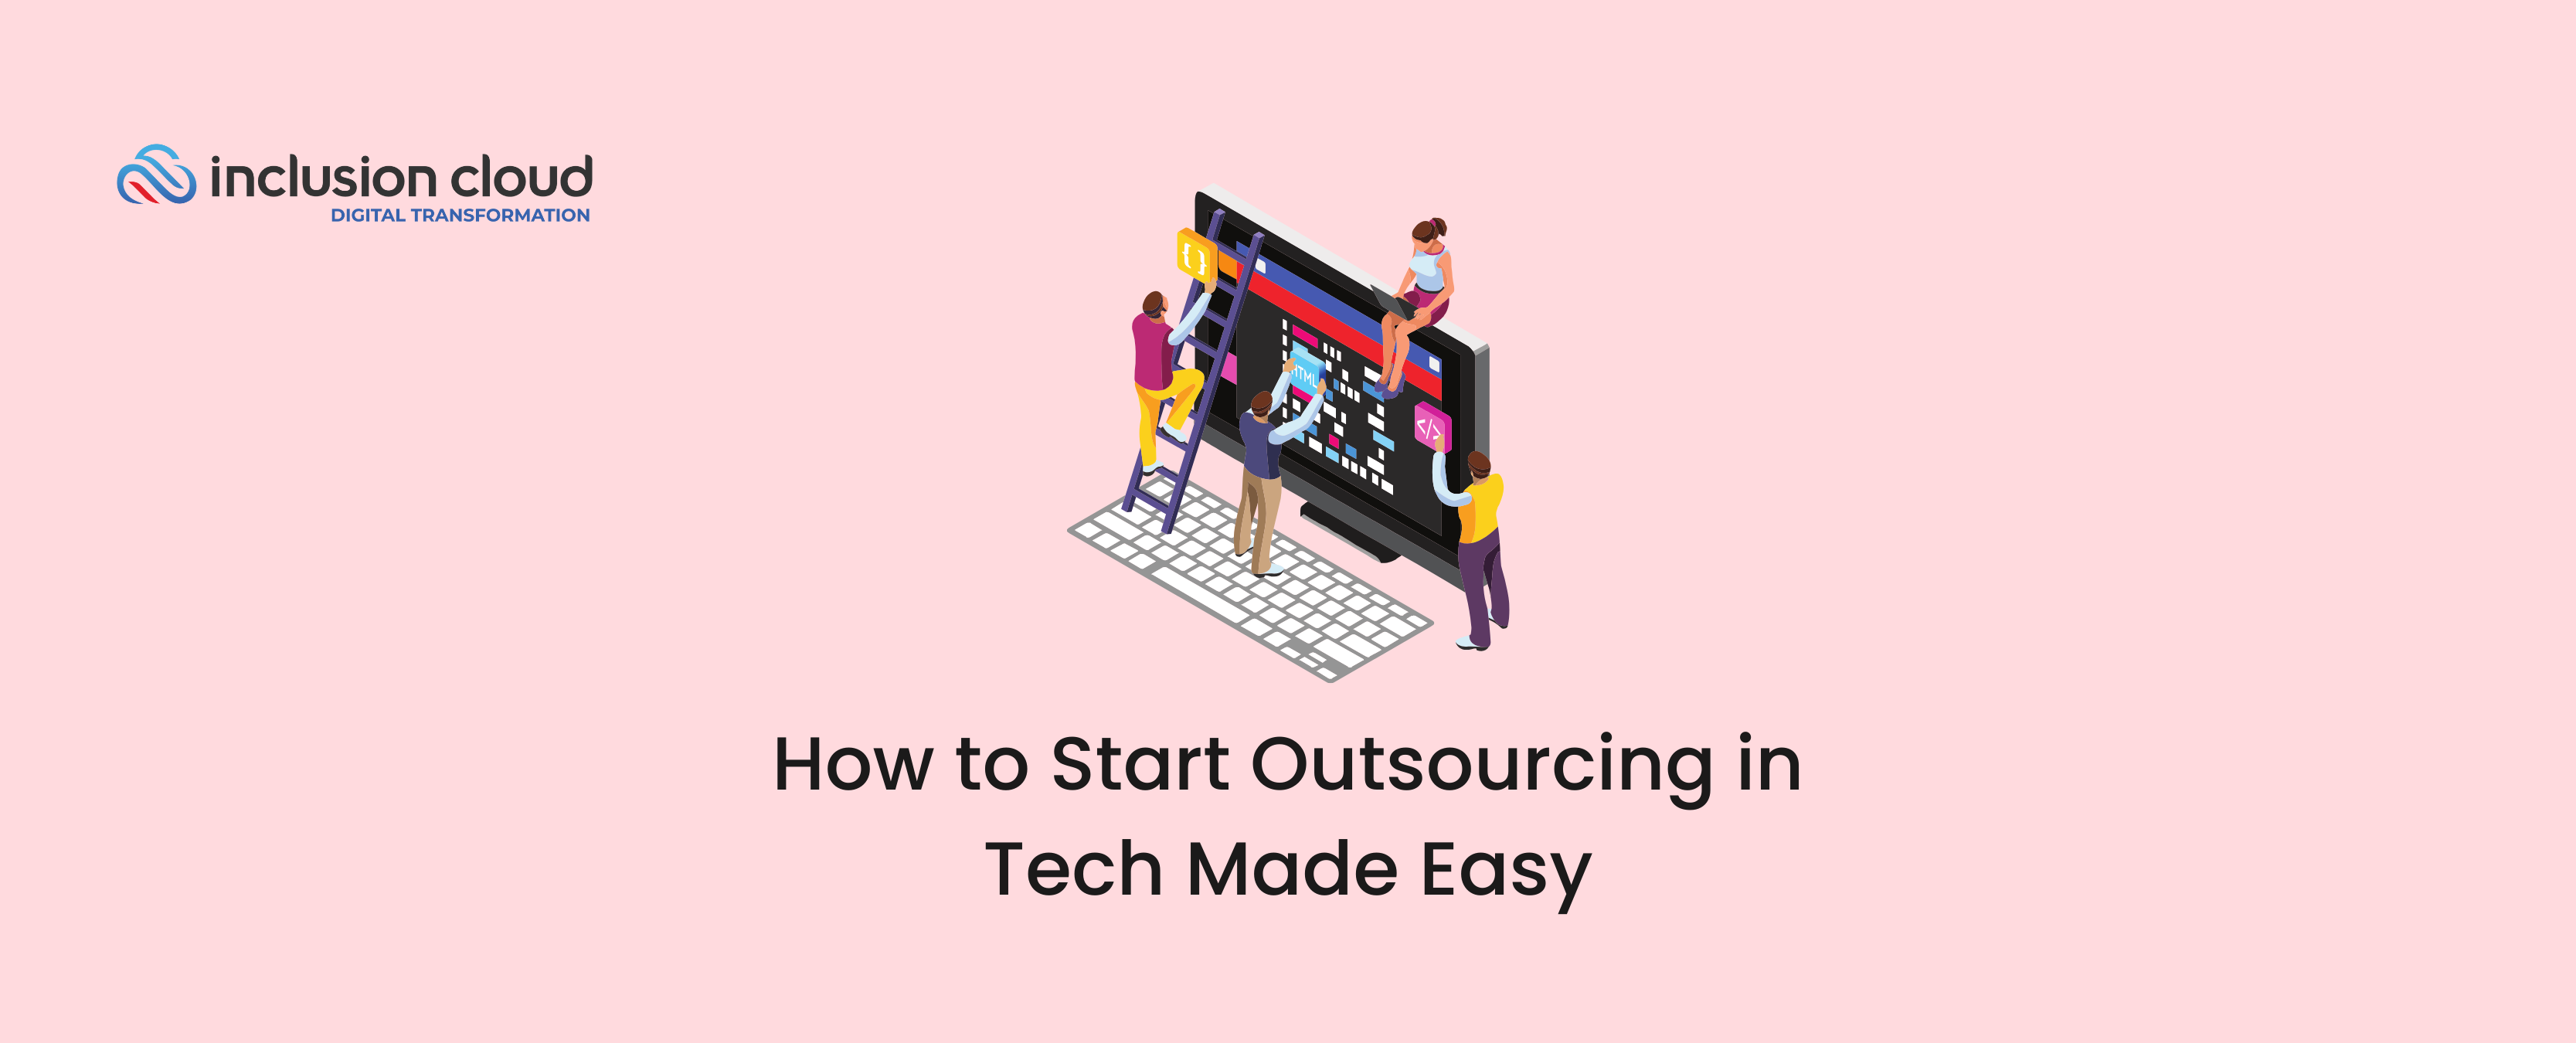 How to Start Outsourcing in Tech Made Easy